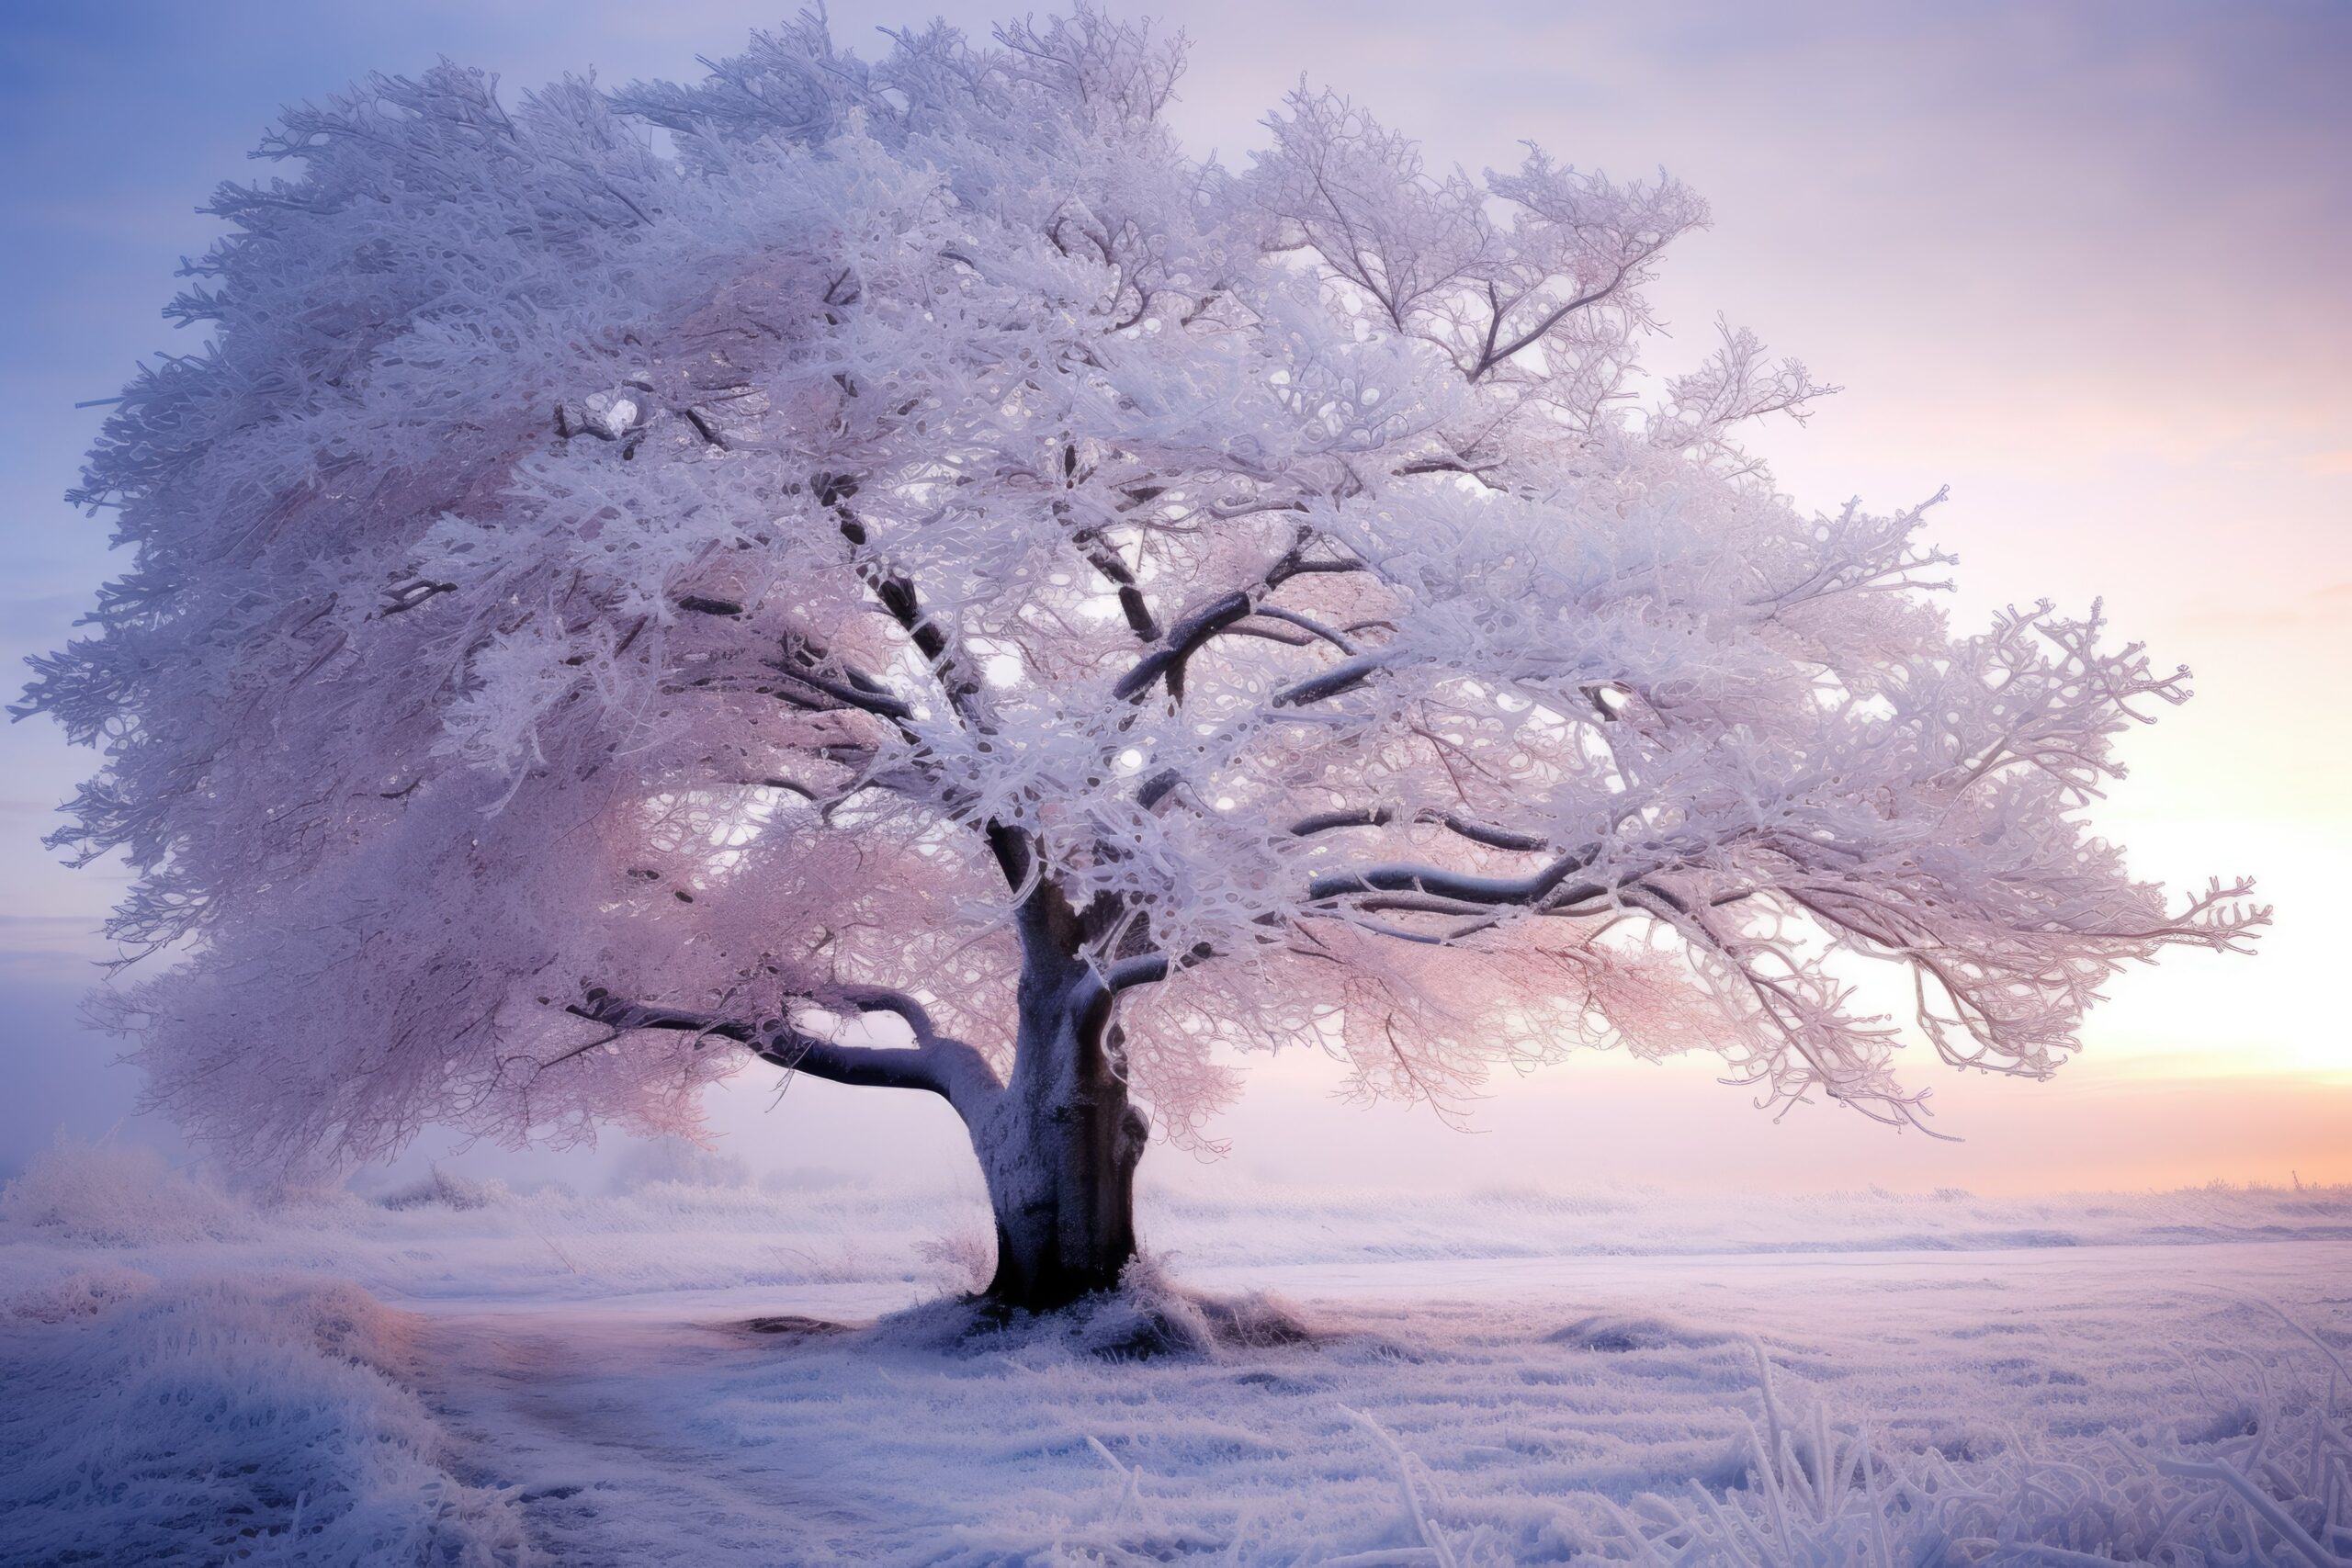 Snowy landscape with a solitary frozen tree